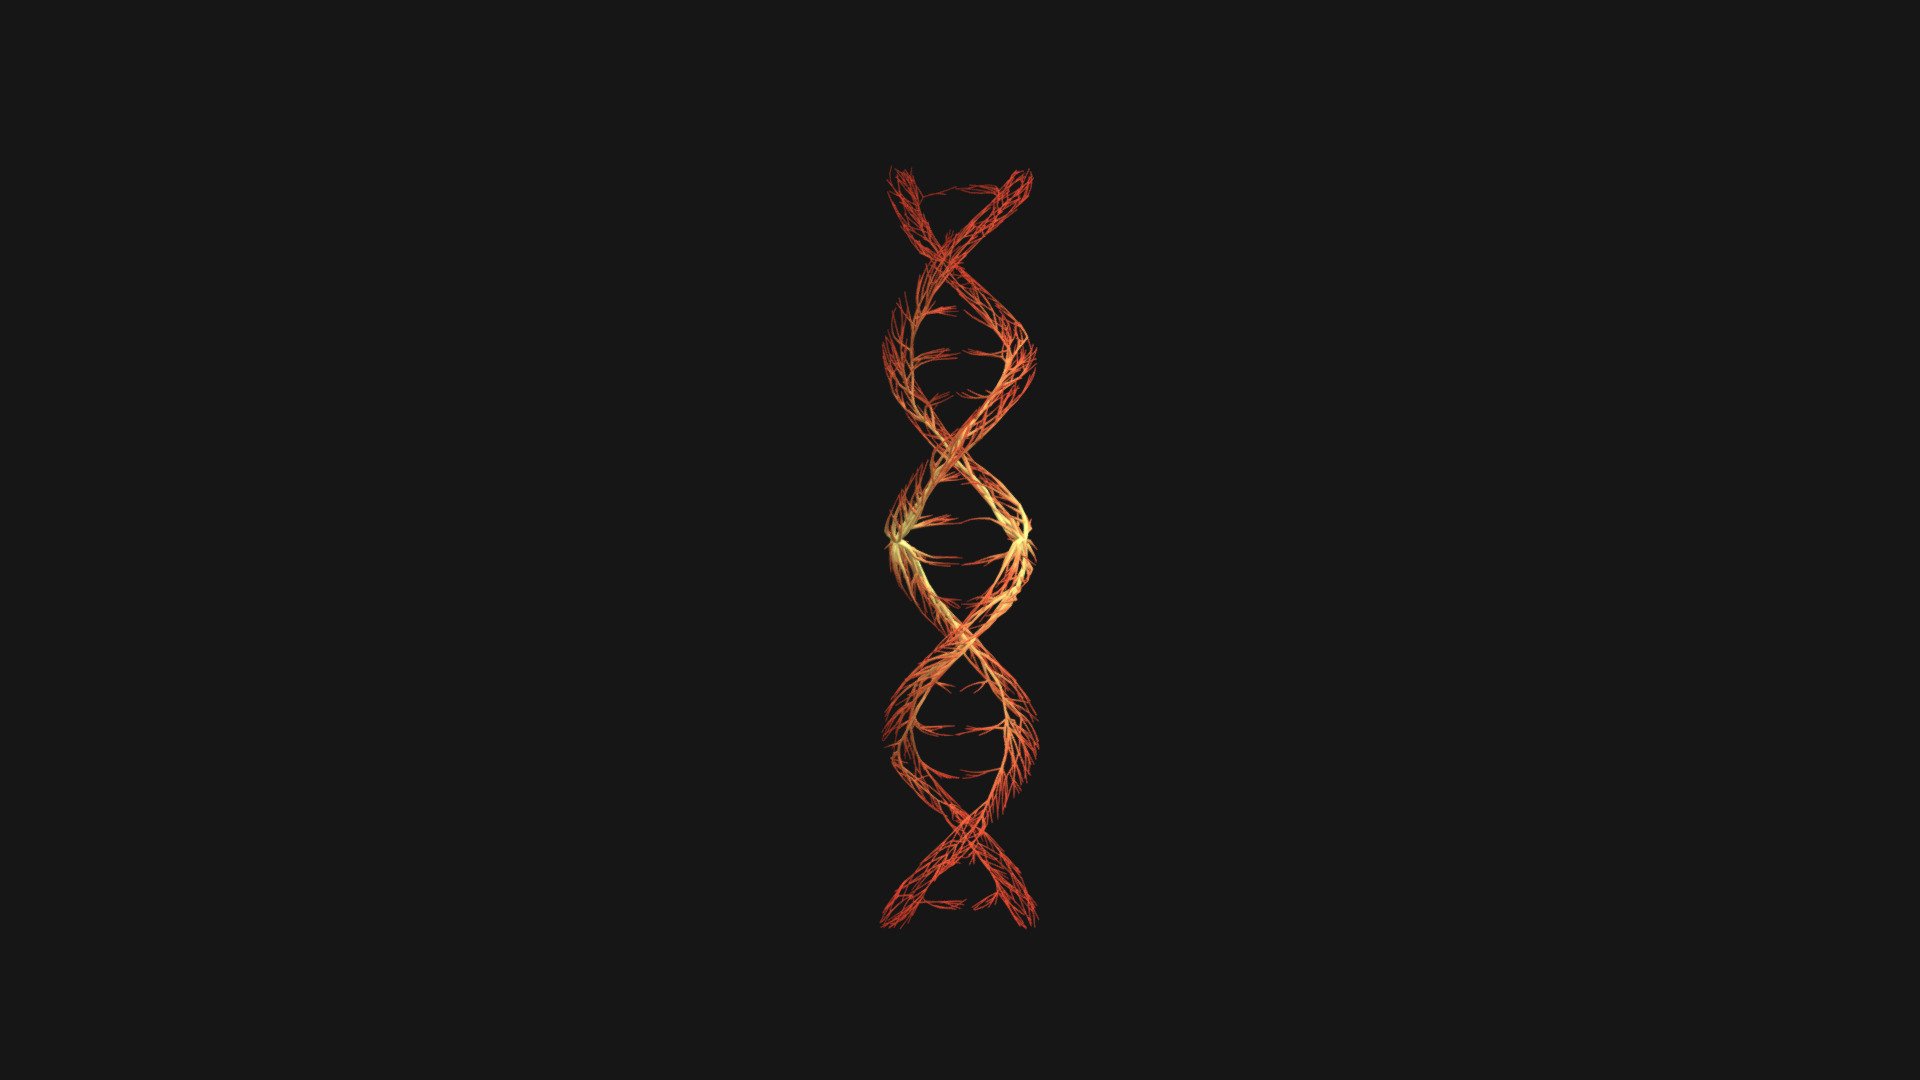 Unrolling growing animation. DNA medical Concept. Deoxyribonucleic Acid.
Human DNA shape made out of wires. Keyframed joints stored as fbx file. Suitable for rendering.
Model has 2 uv channels and vertex colors. Package also contain sample texture gradient and animated Alembic Vertex cache.
FBX version: 2020.0.1
Alembic 1.5. Ogawa
Blender version: 3.3 - Human DNA unrolling growing animation - Buy Royalty Free 3D model by zexell 3d model